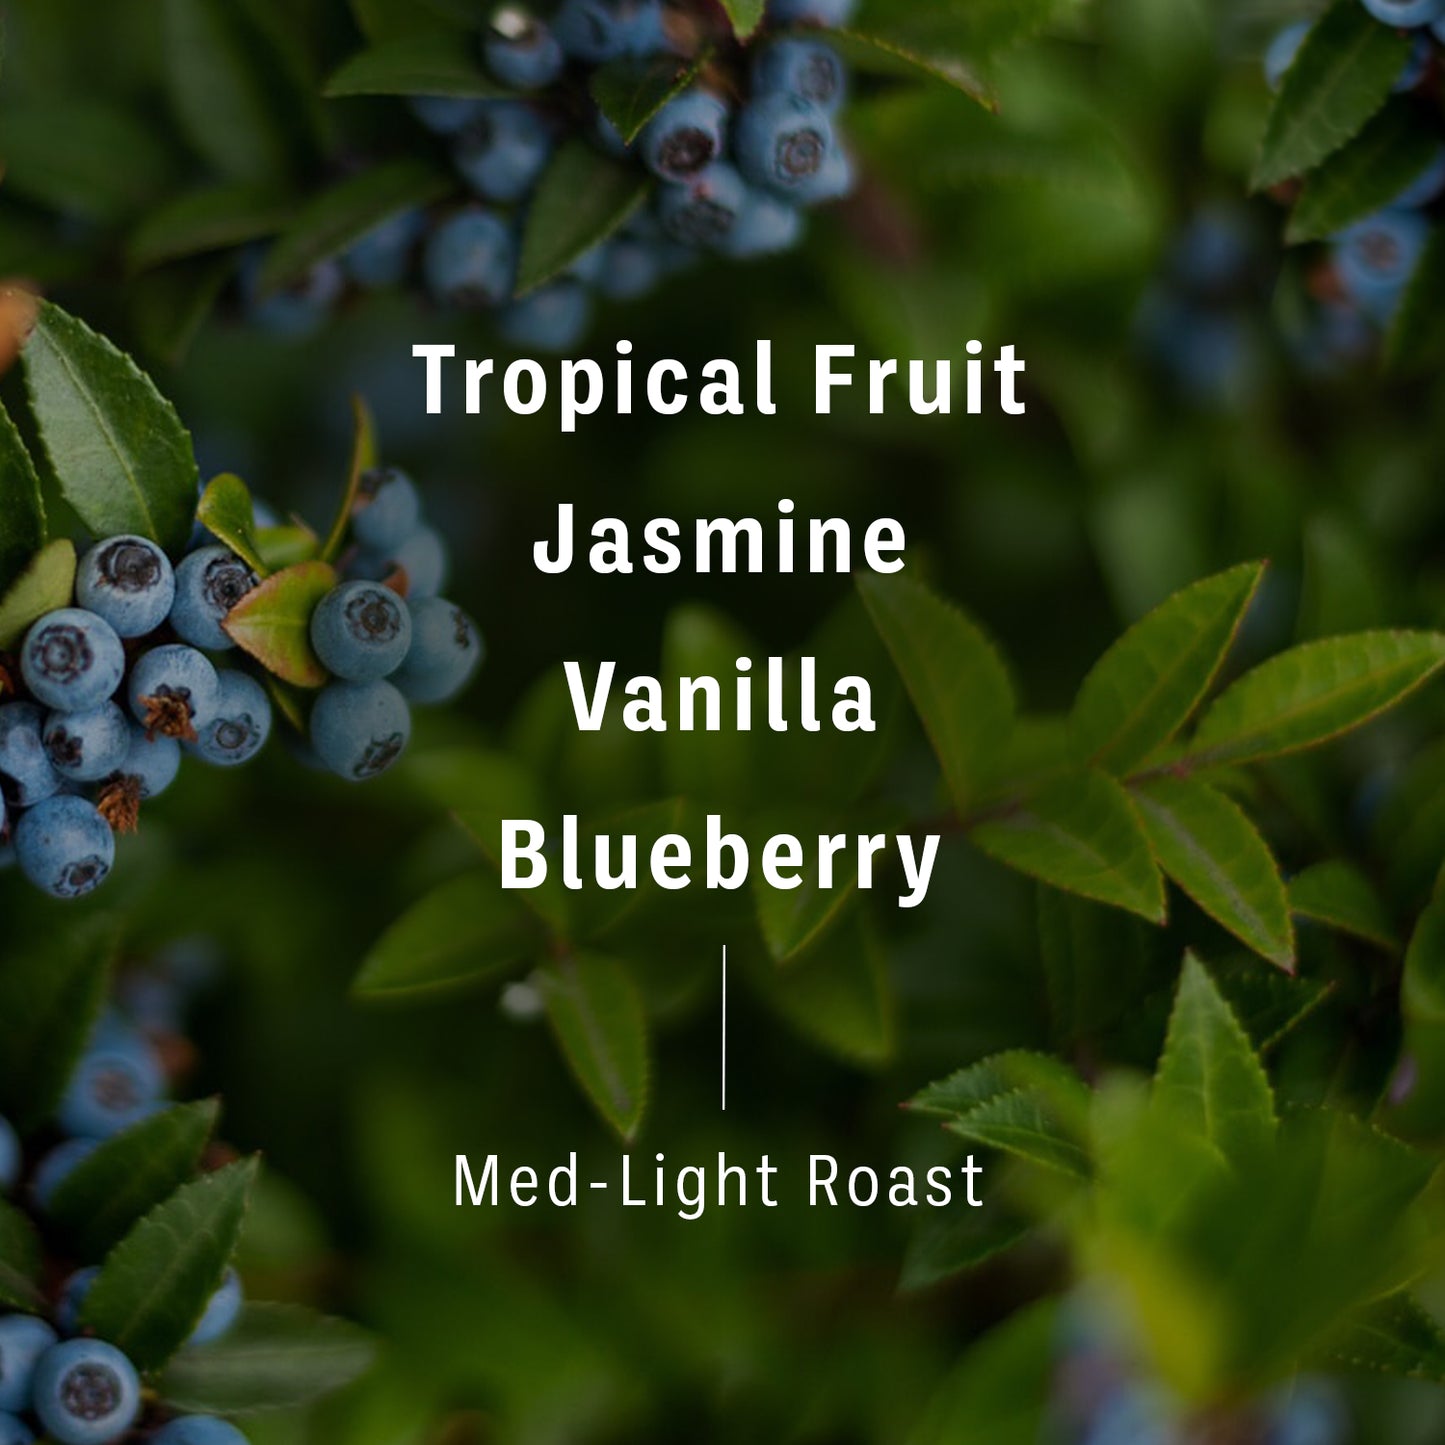 Flavor notes and roast level of Glowy Gesha coffee beans imposed on background of blueberry bush. Text reads, “Tropical Fruit, Jasmine, Vanilla, Blueberry, Med-Light Roast," 2 of 4.